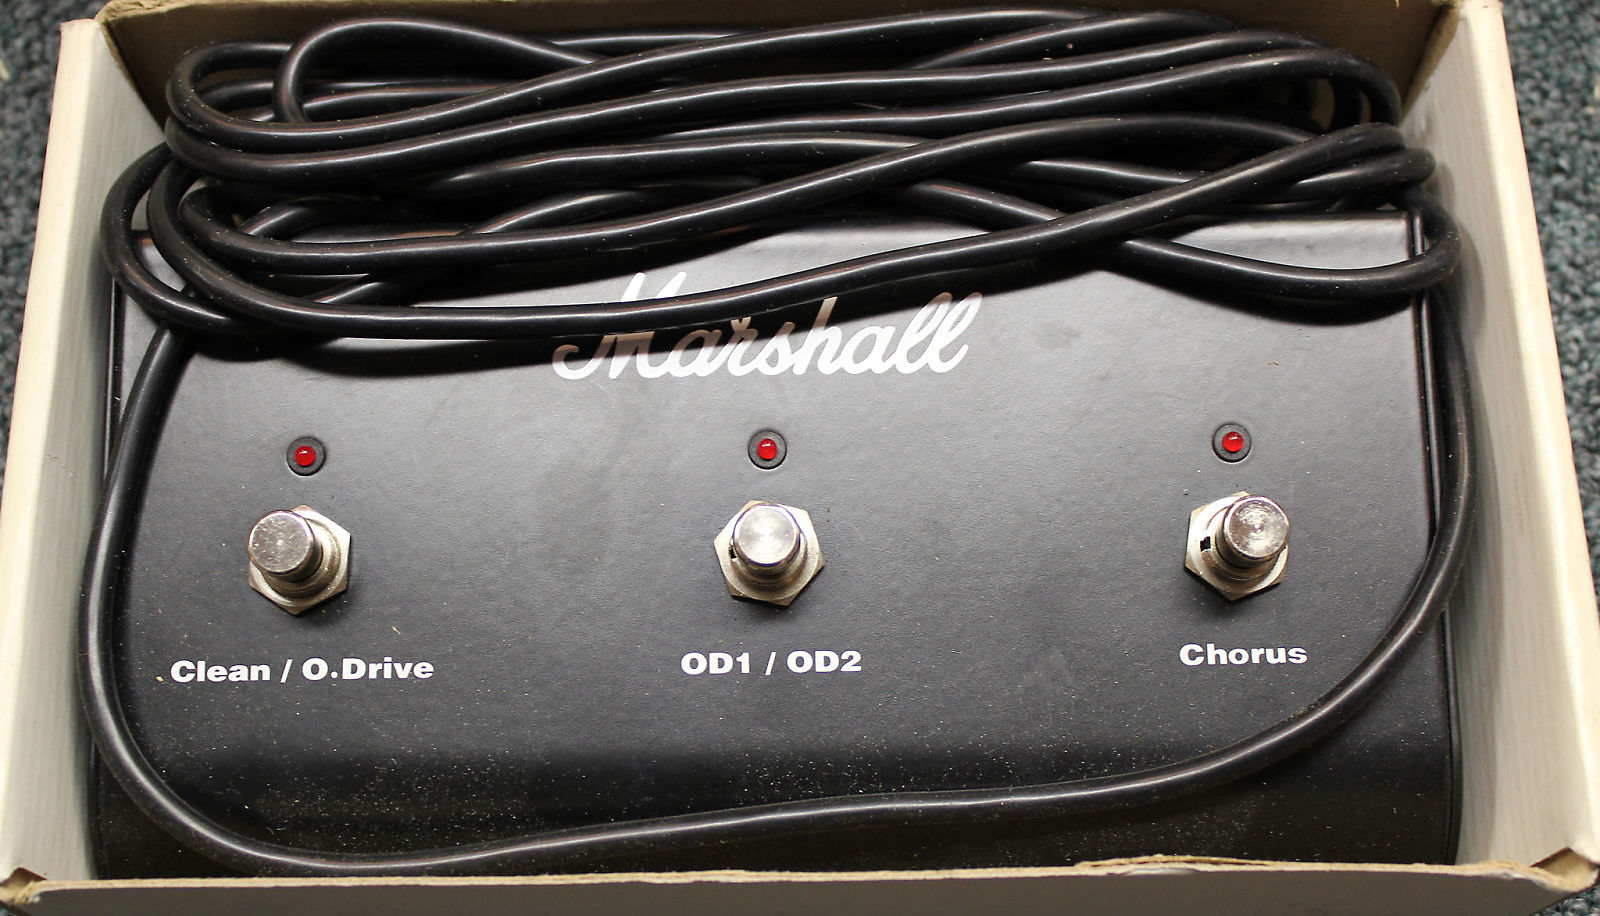 Marshall Ped803 3 Button Footswitch With Leds Reverb